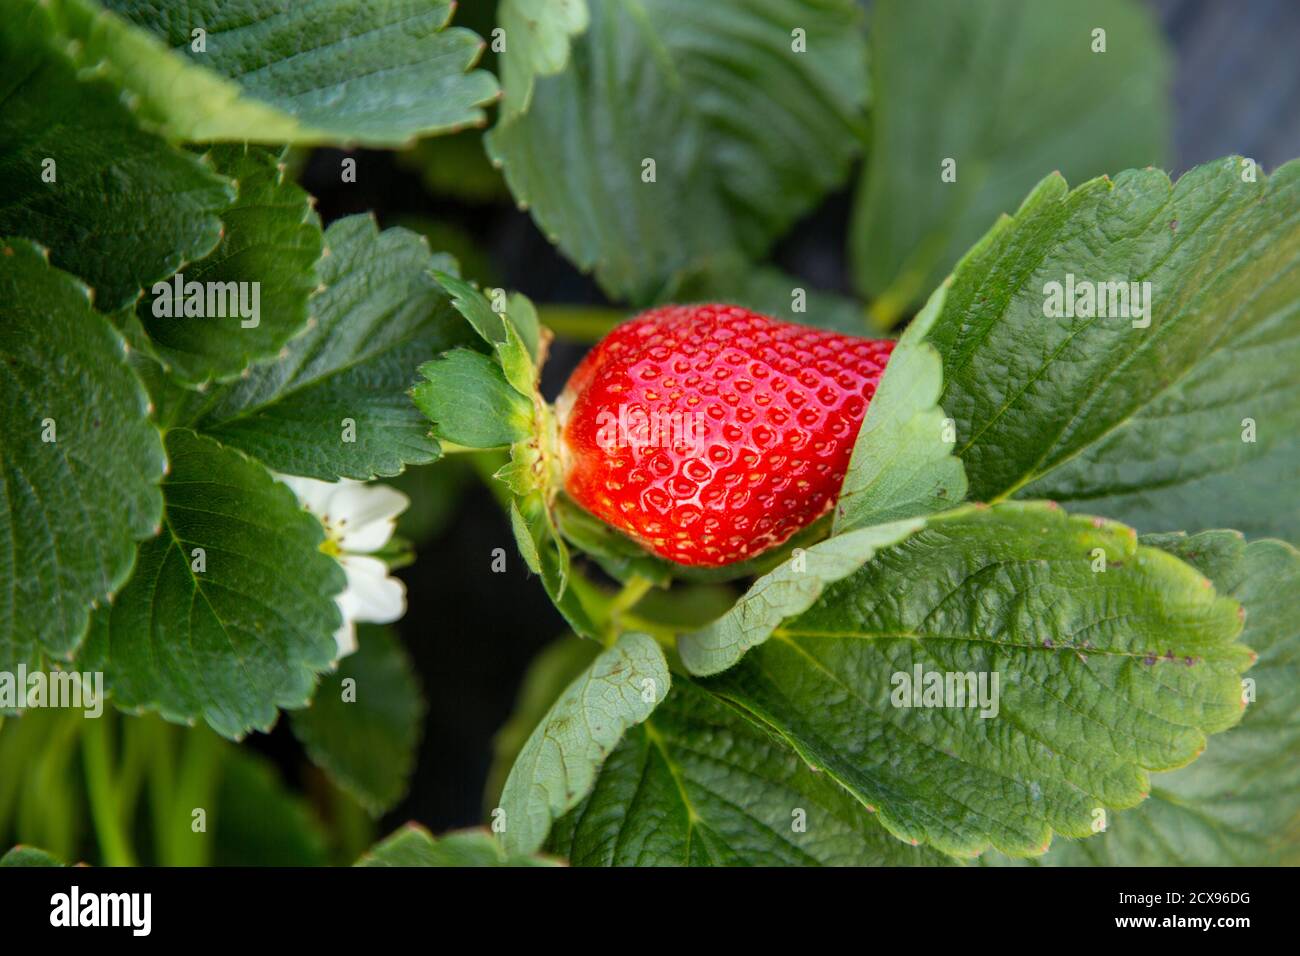 Strawberry plant with fruit and flowers Stock Photo